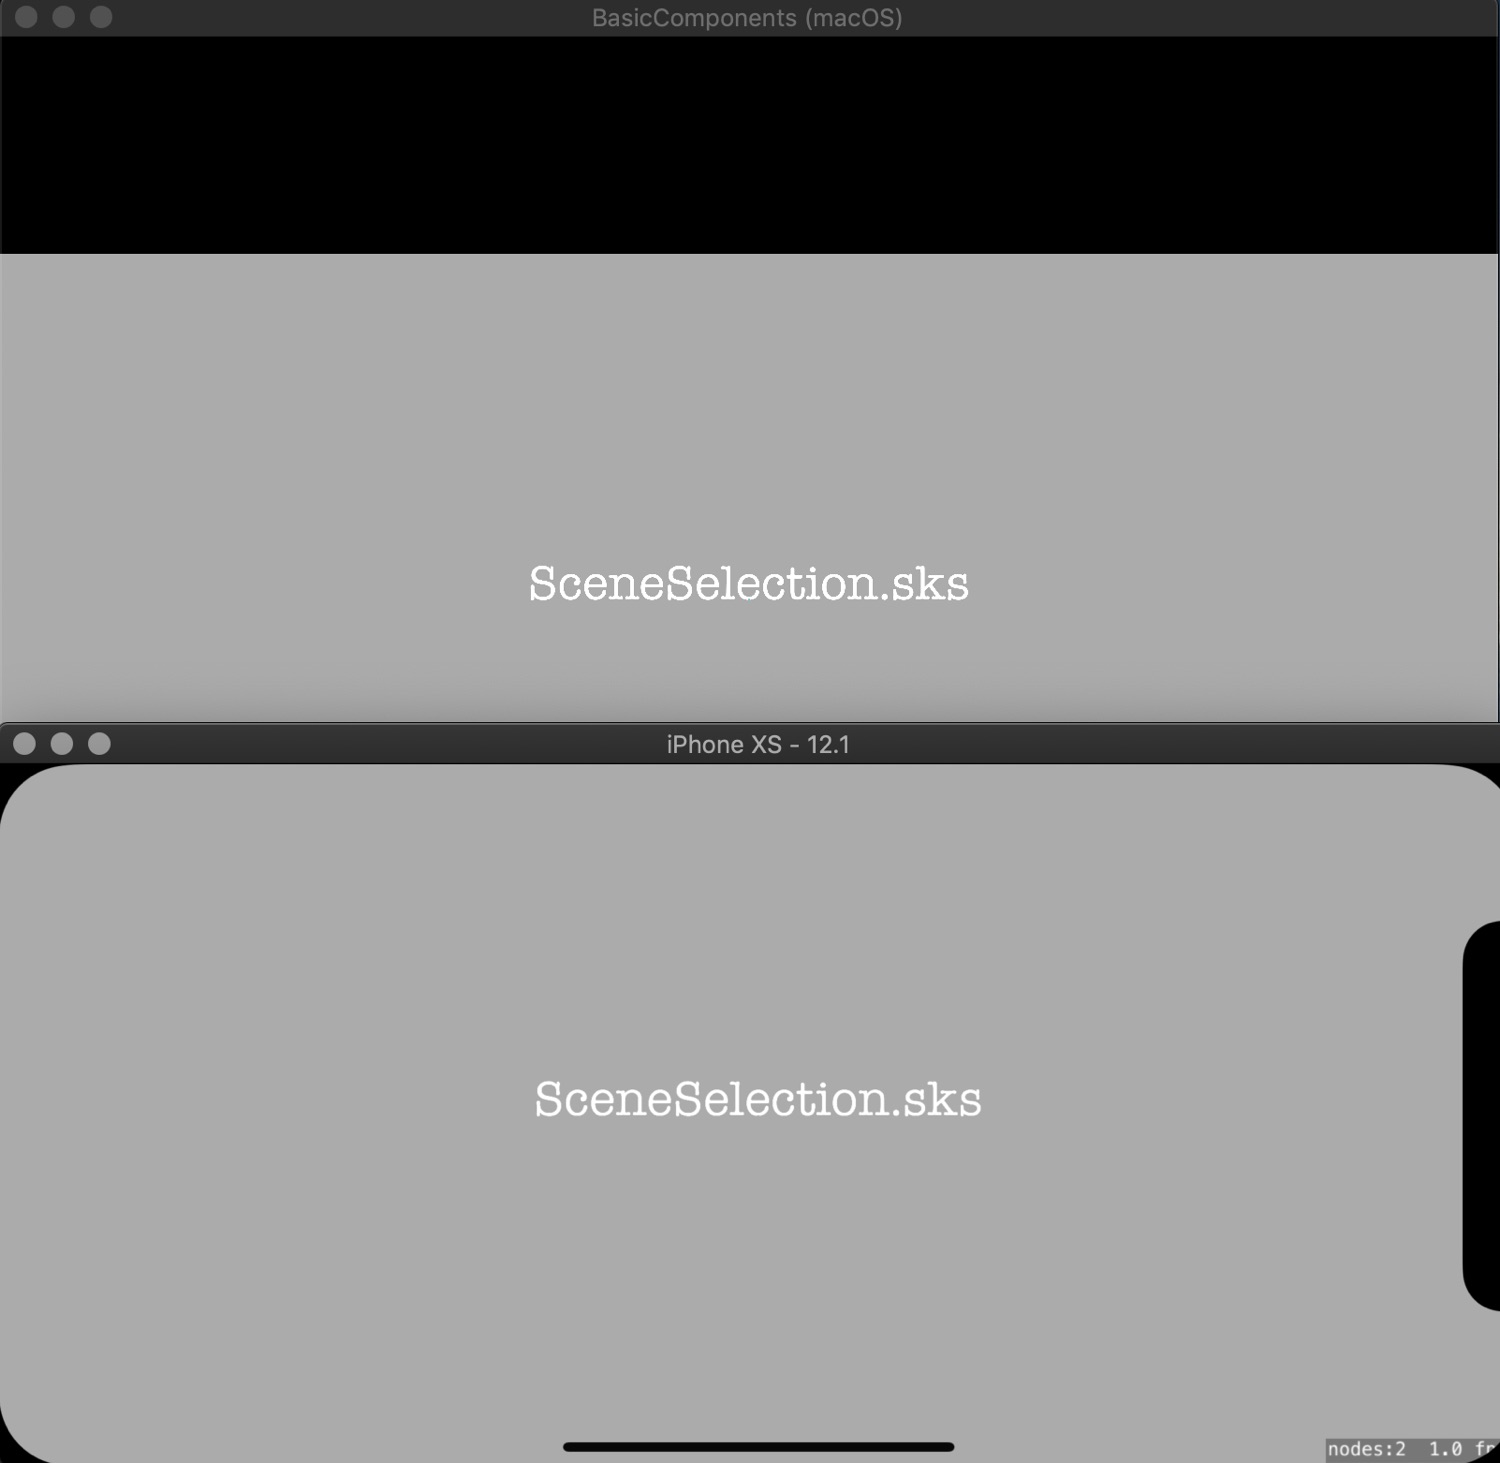 Screenshot showing the macOS app and the iOS simulator both loading the same scene correctly.